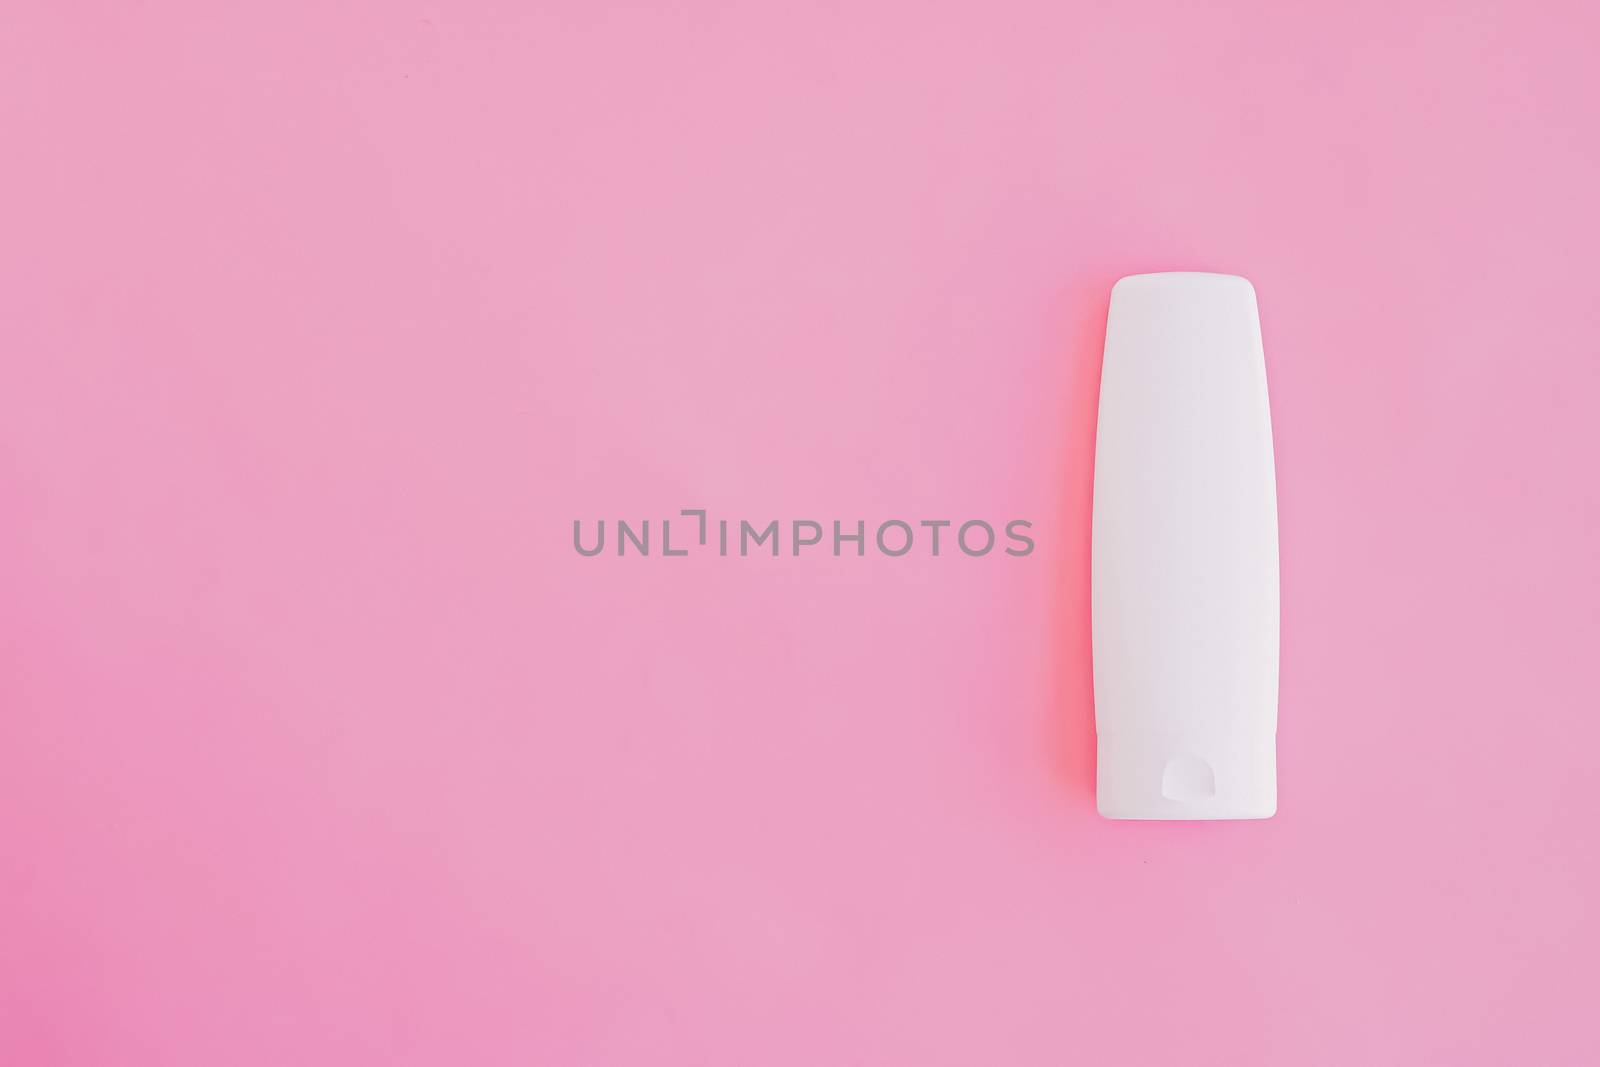 Moisturizing hand cream or body lotion on pink background, beauty product and skin care cosmetics, flatlay